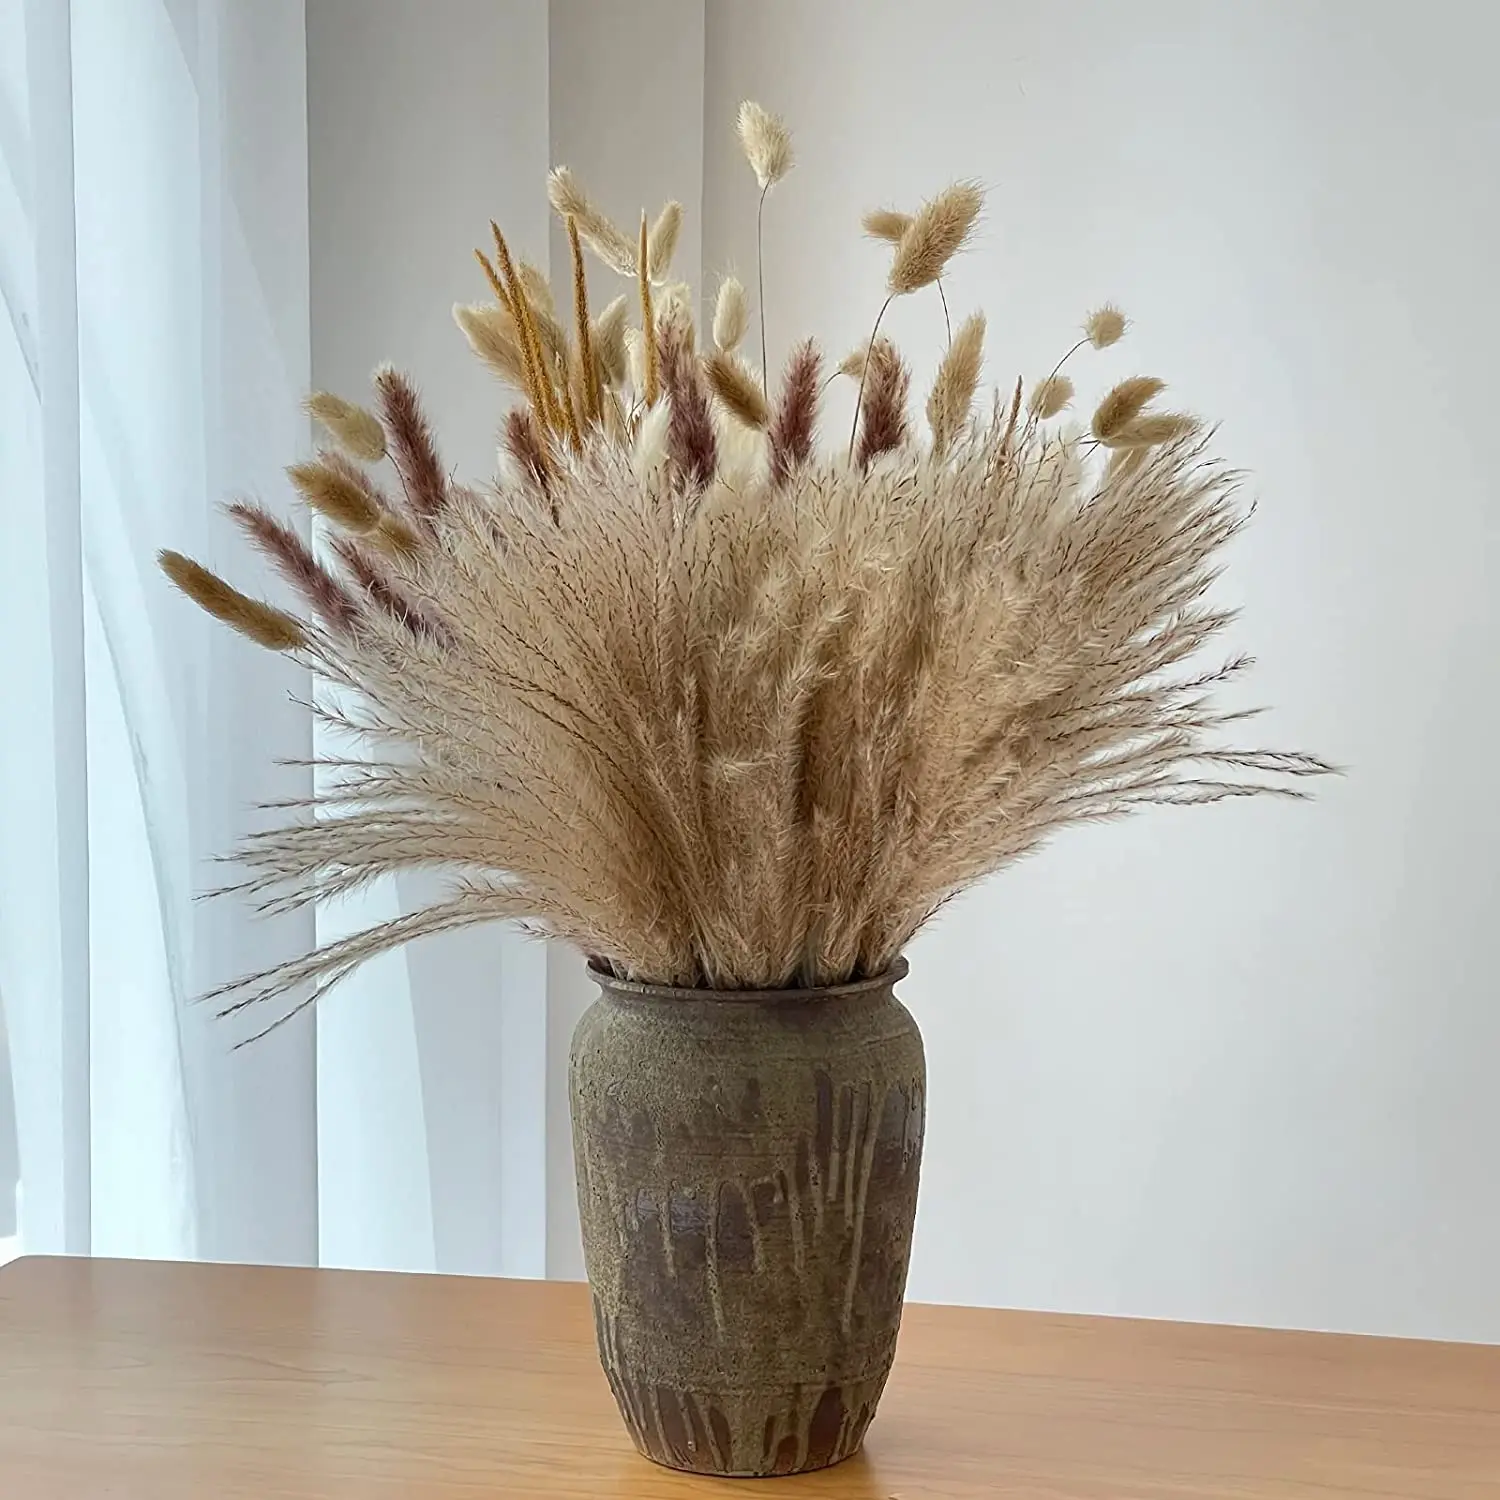 

120PCS Dried Pampas Grass Contains Bunny Tails Dried Flowers Reed Grass Bouquet for Wedding Boho Flowers Home Table Decor Pampa